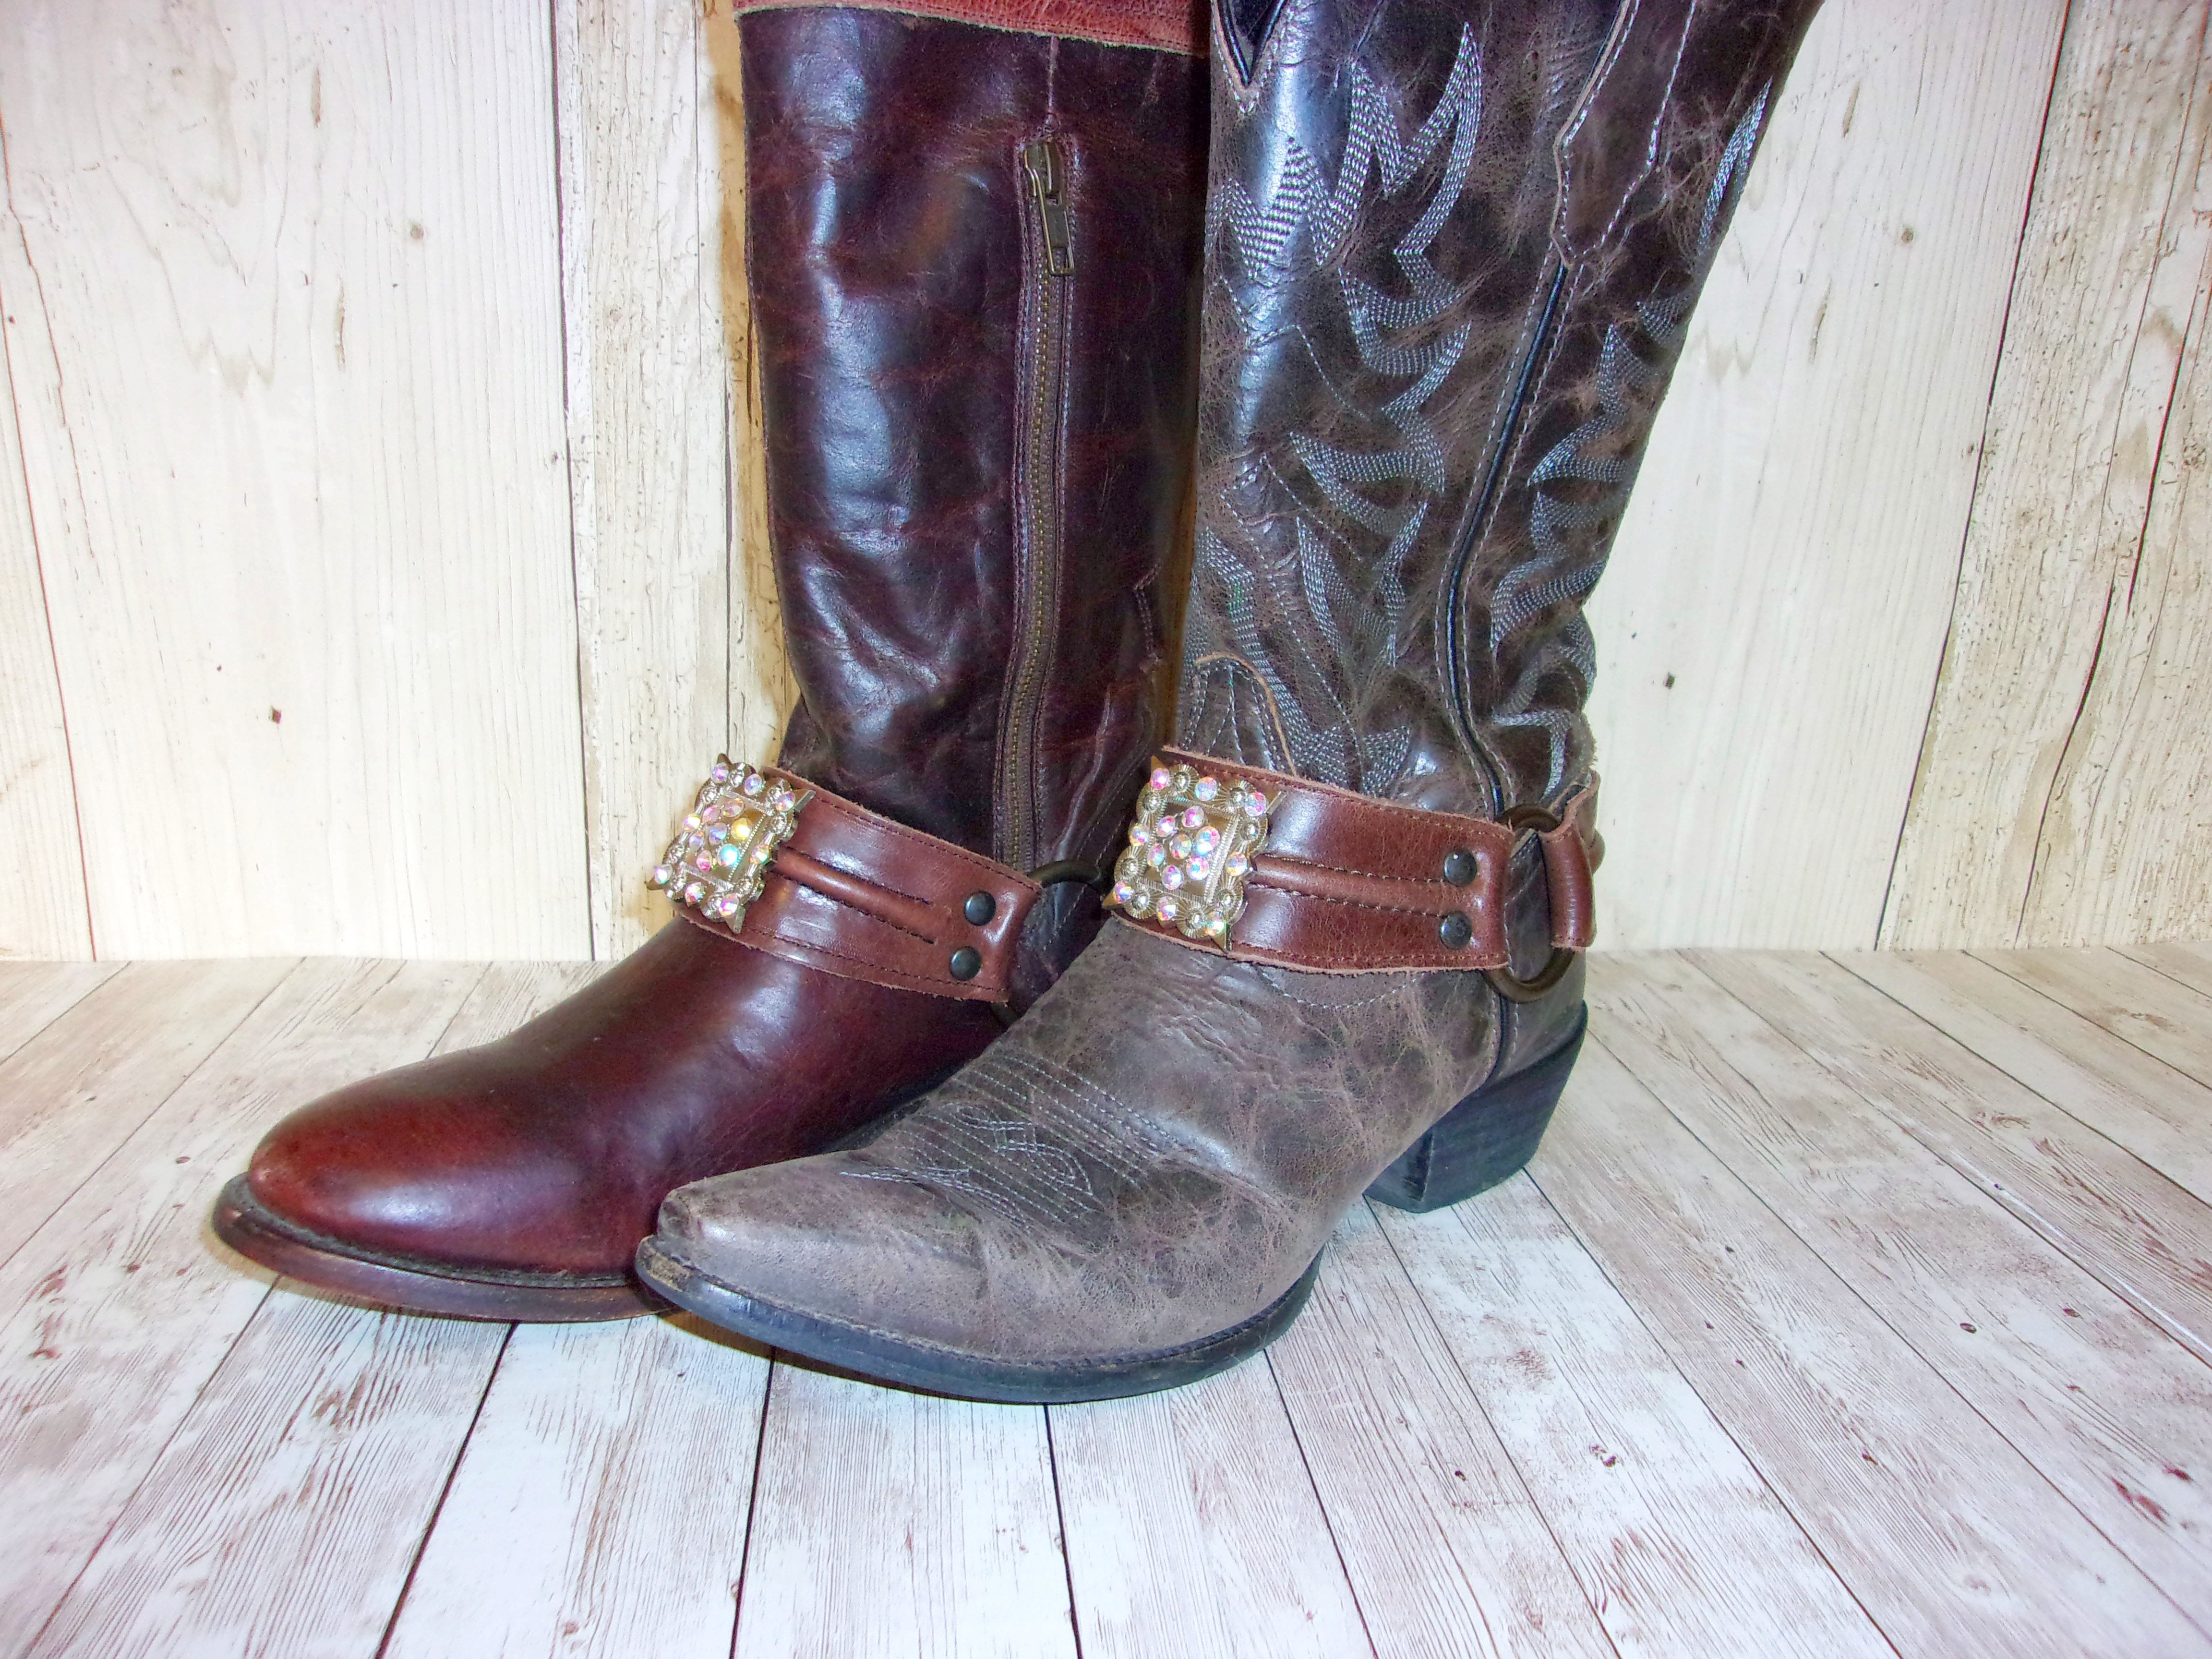 Boot Decoration - Boot Wrap - Boot Bling - Boot Jewelry - Boot Bracelet (Pair) wr03 cowboy boot purses, western fringe purse, handmade leather purses, boot purse, handmade western purse, custom leather handbags Chris Thompson Bags